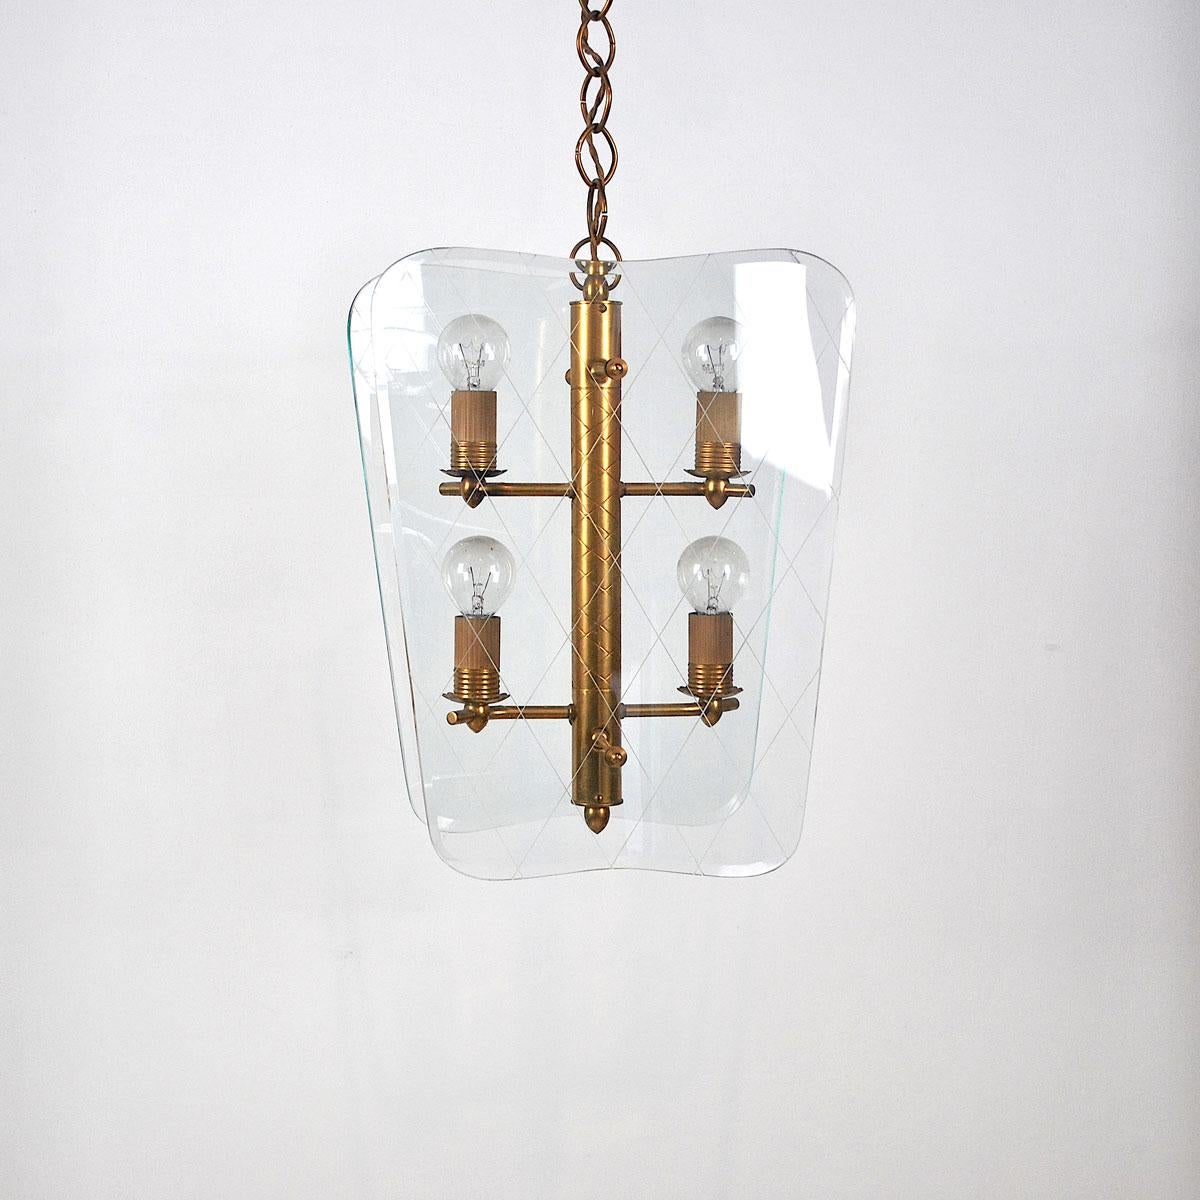 Chandelier by Pietro Chiesa for Fontana Arte from 1940s.